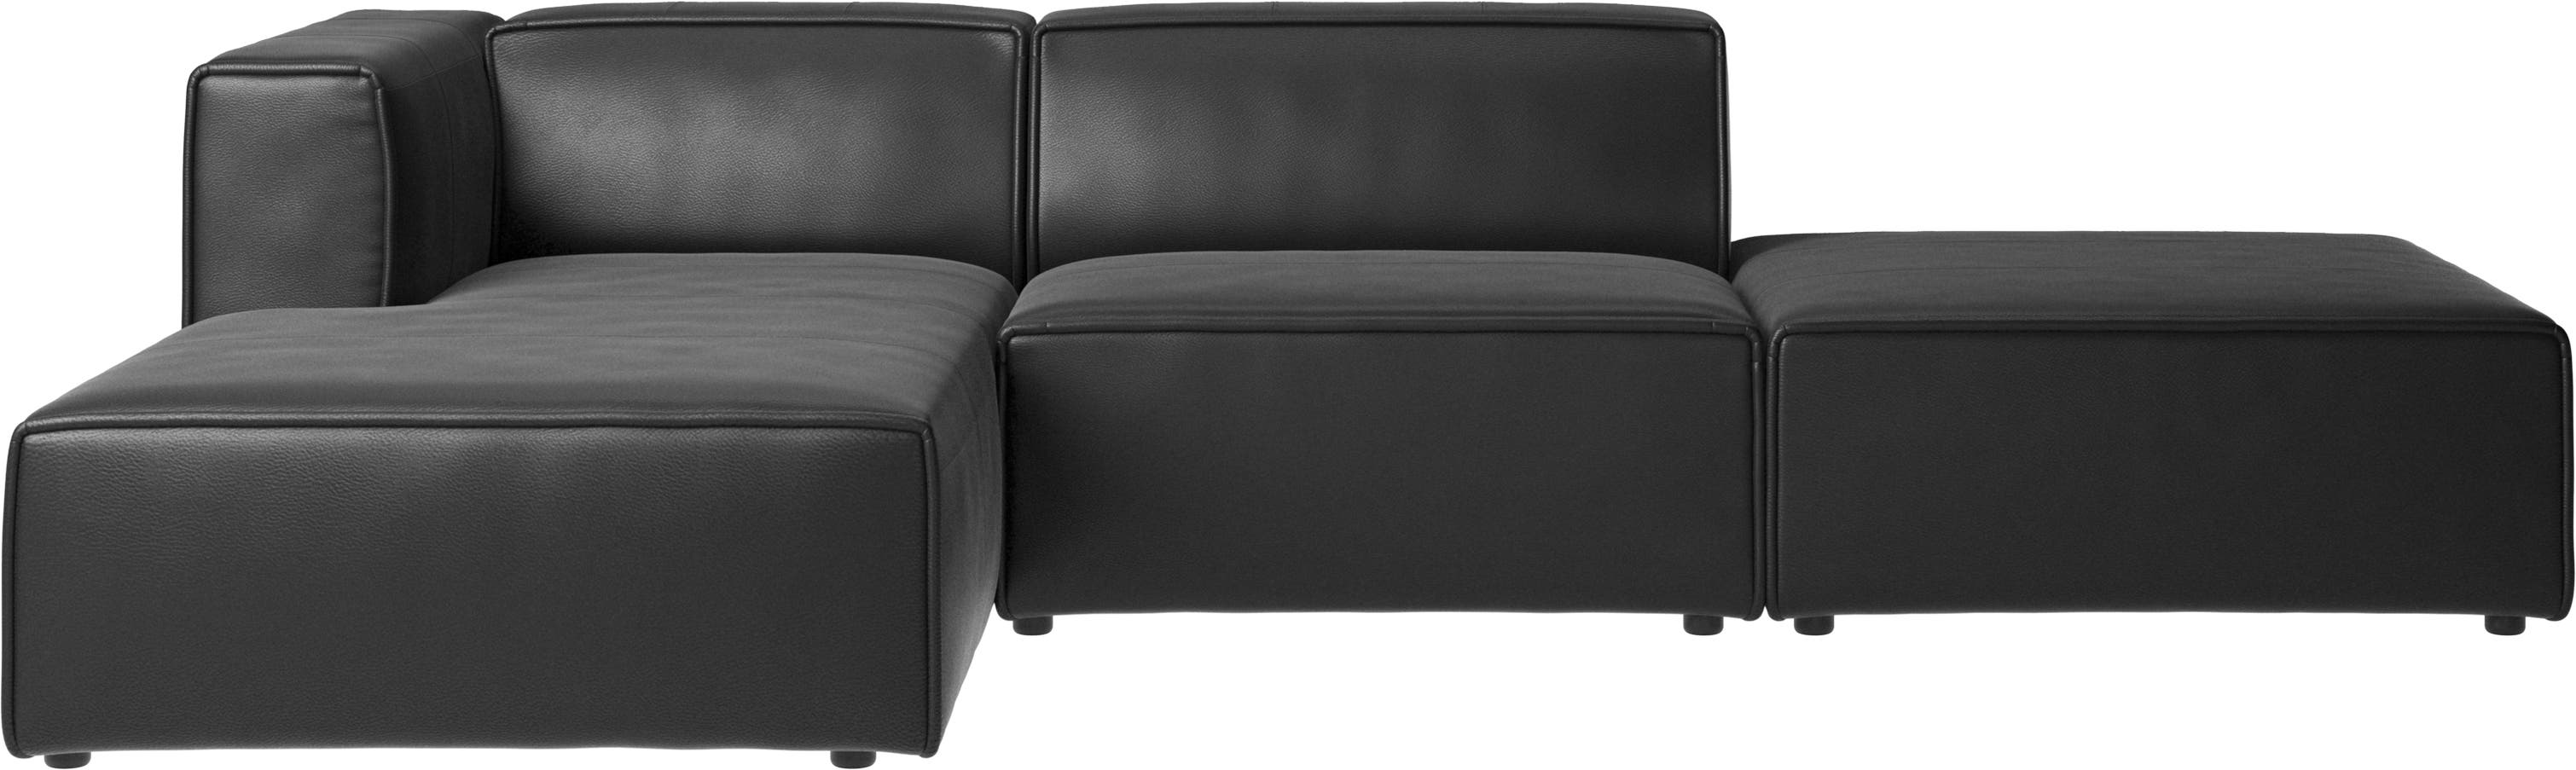 Carmo sofa with lounging and resting unit